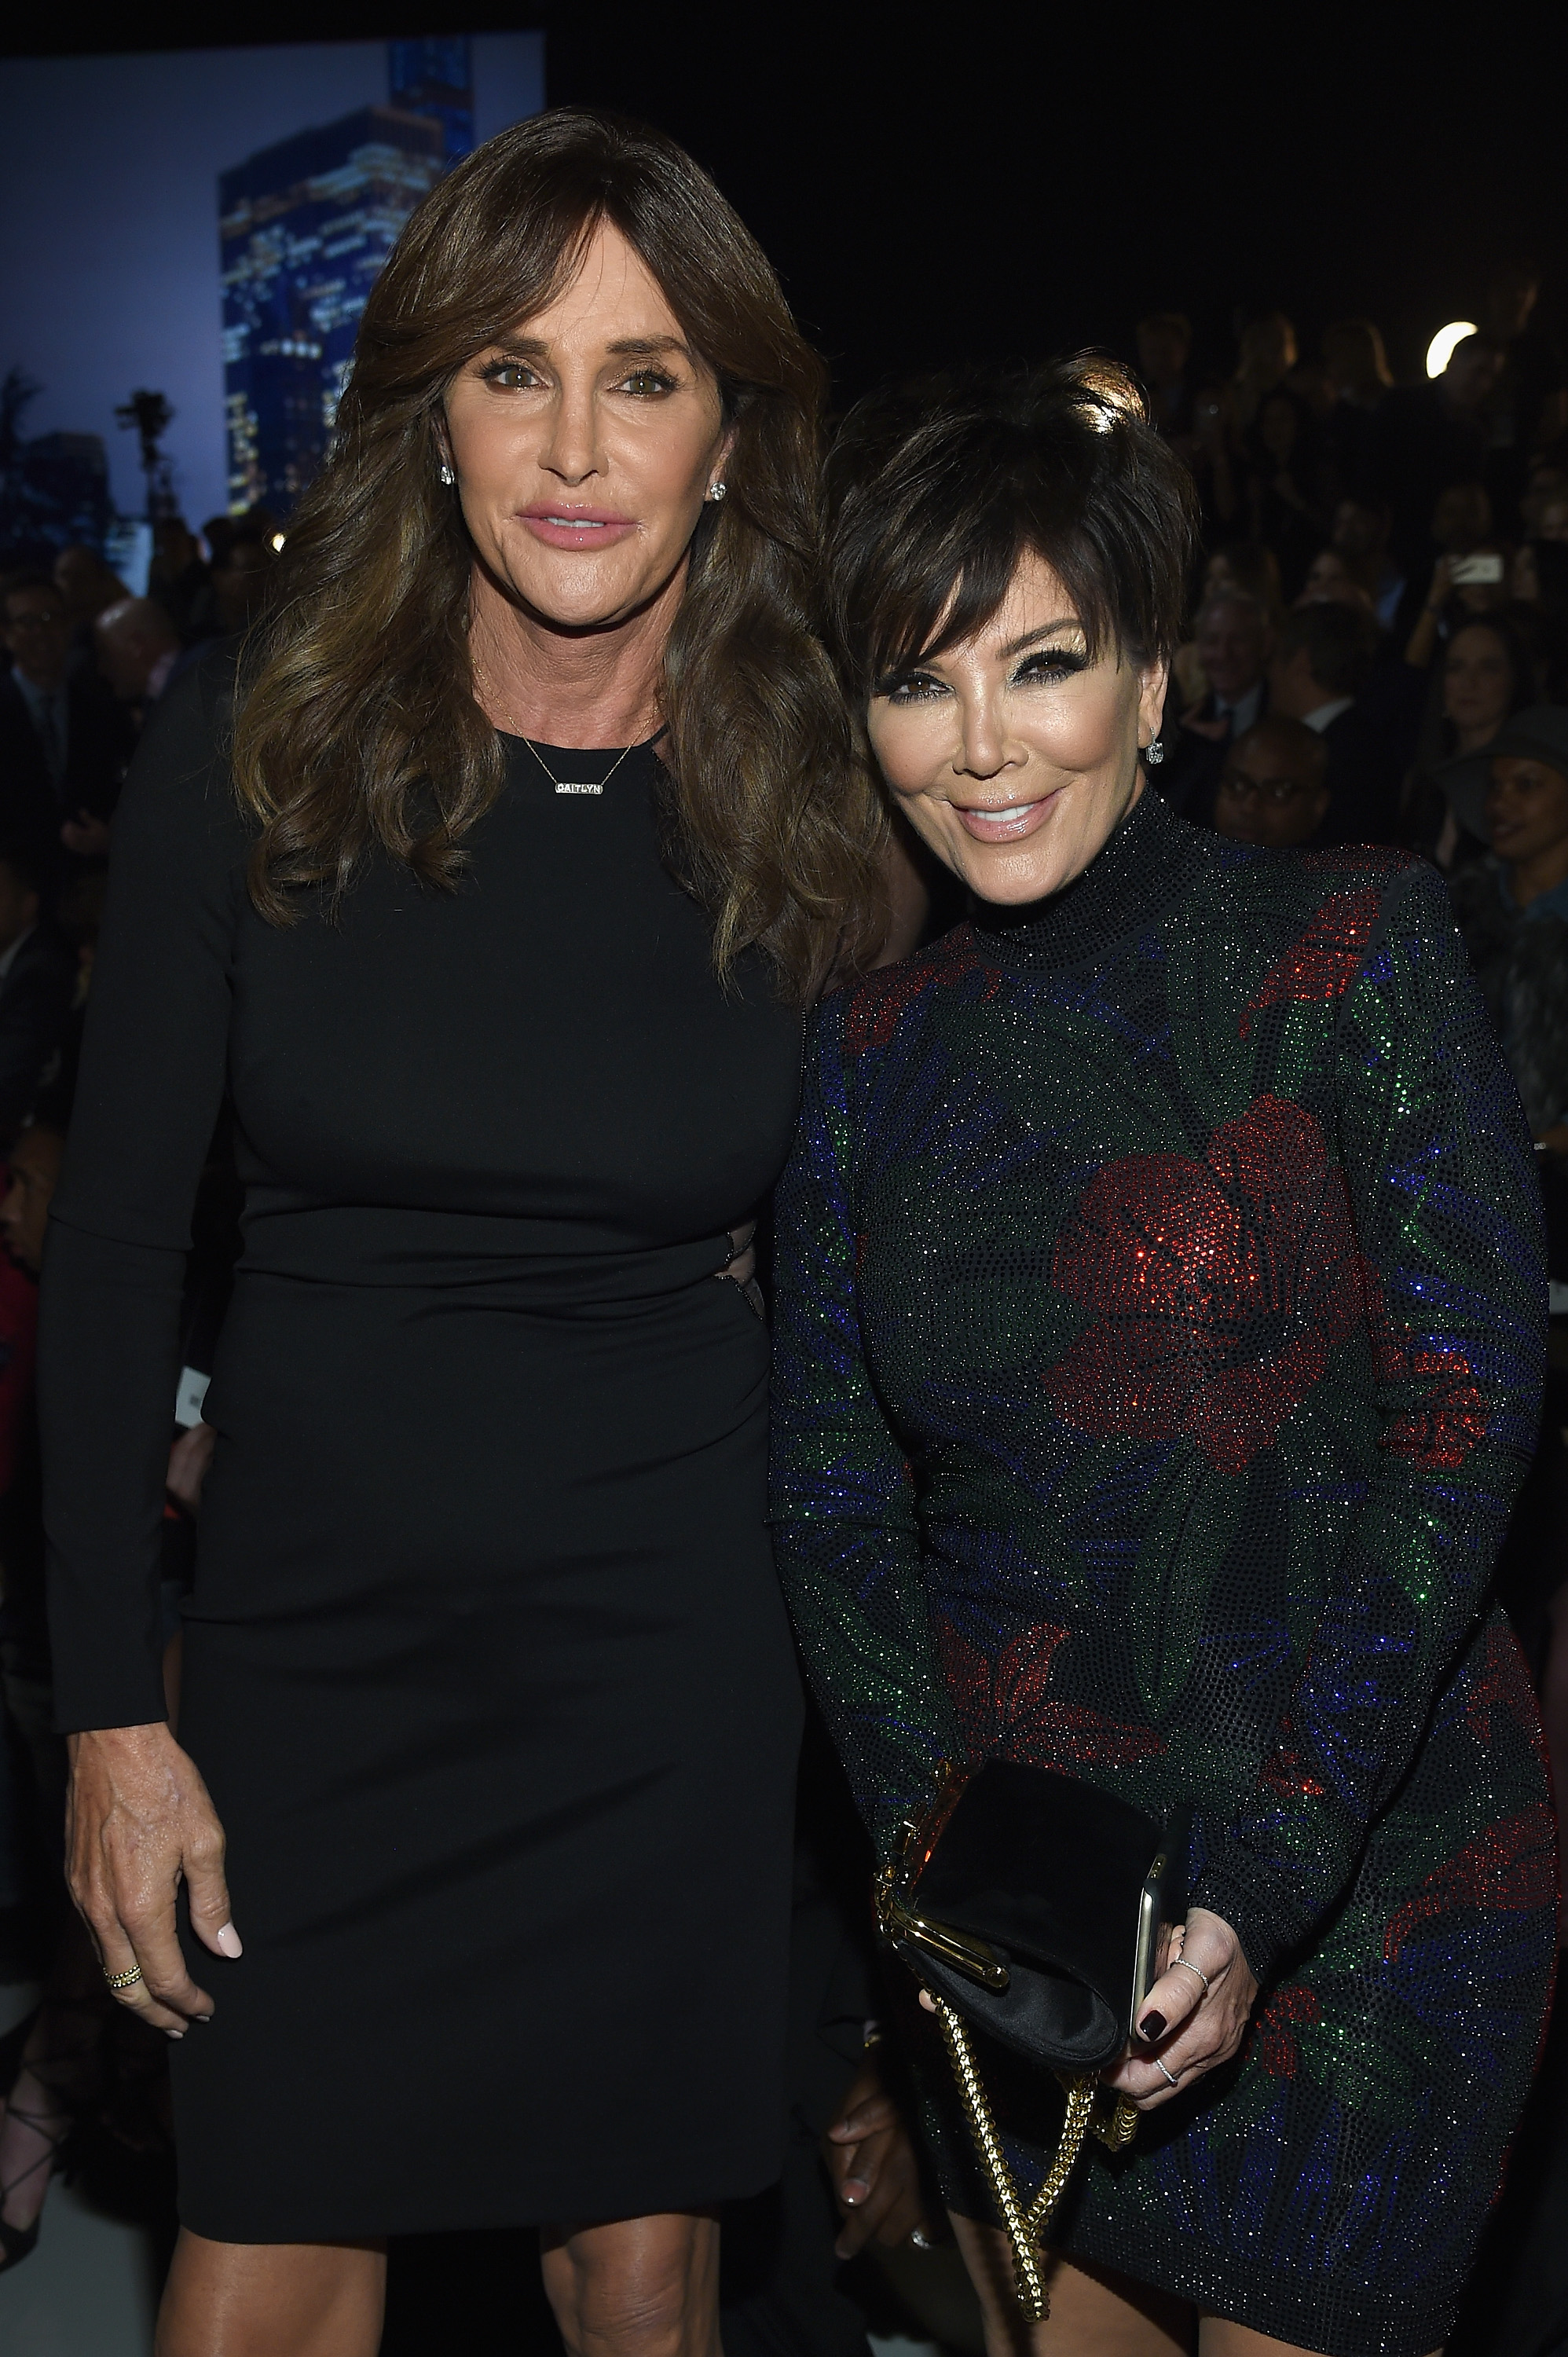 Caitlyn Jenner says she'll 'never' have another romantic relationship